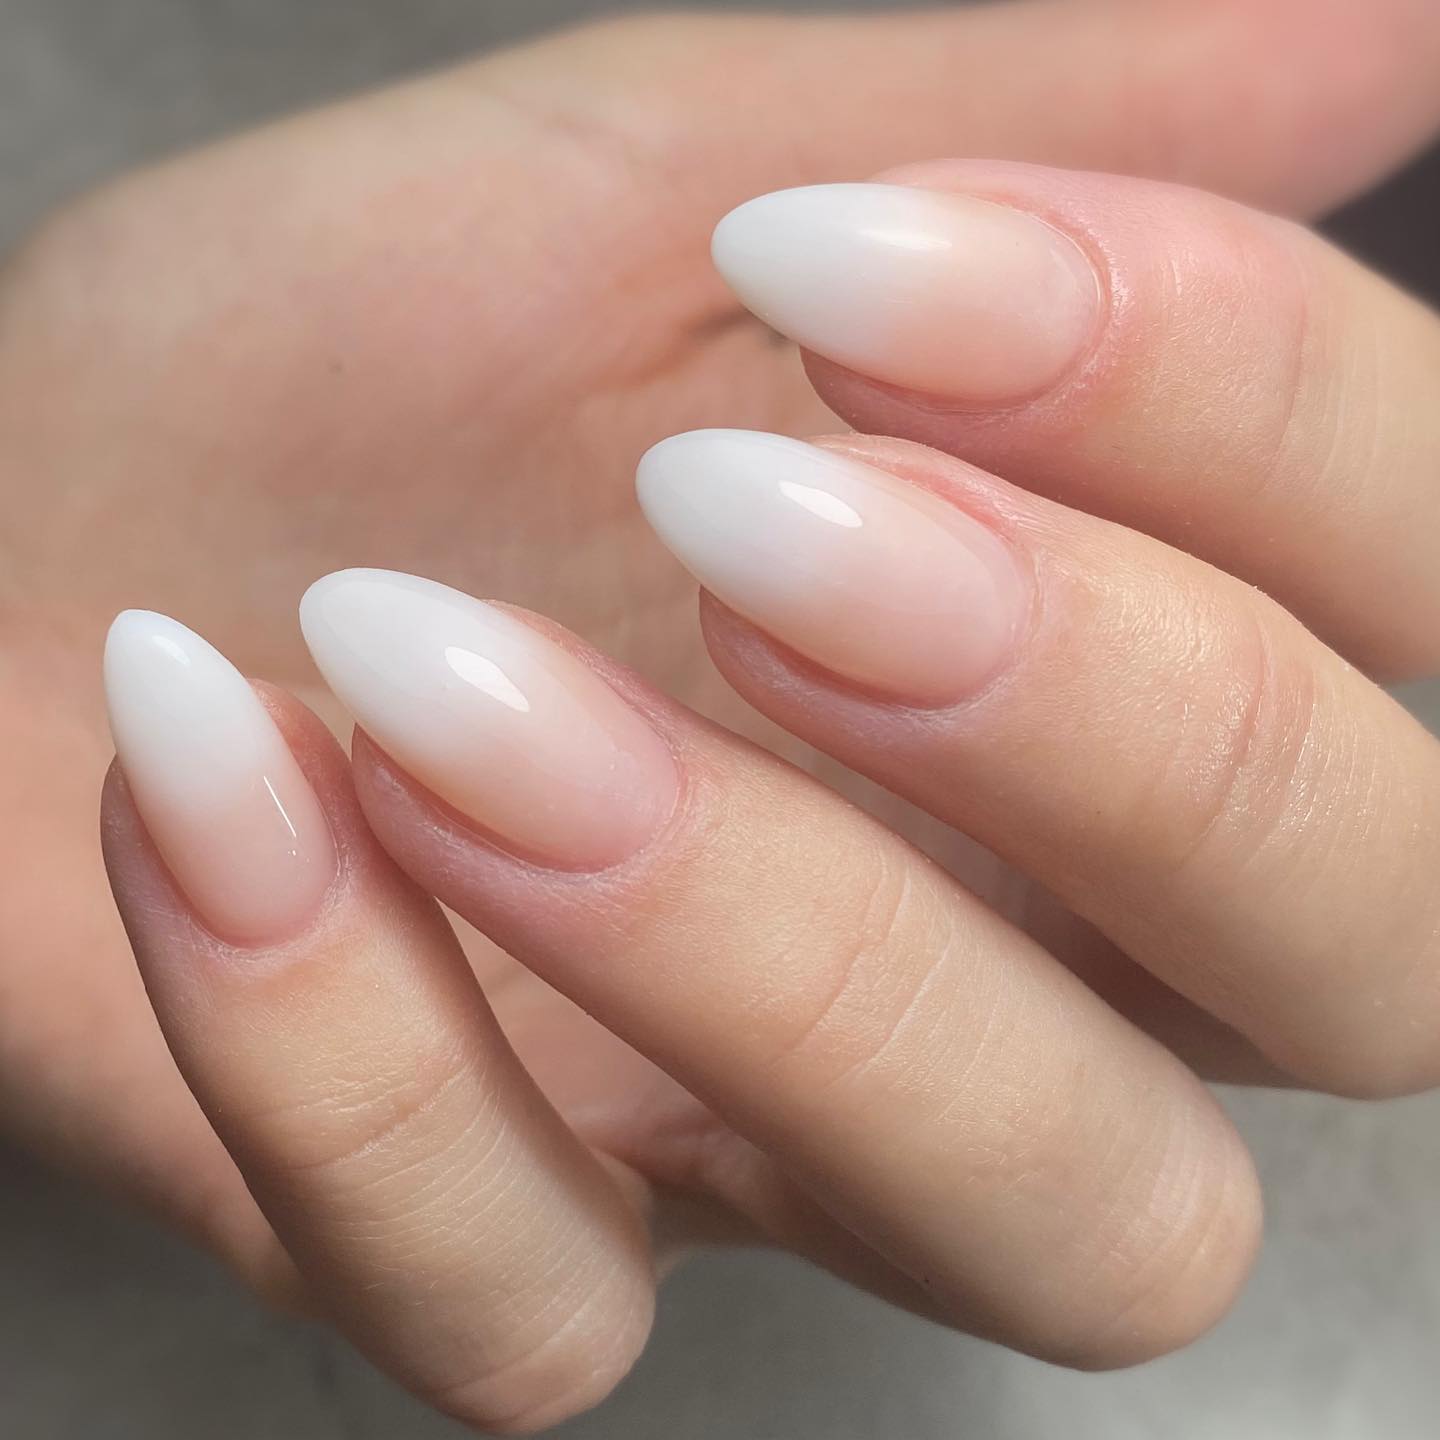 Oval nude French manicure such as this one is the best go-to for your formal or office moments, don’t you agree?